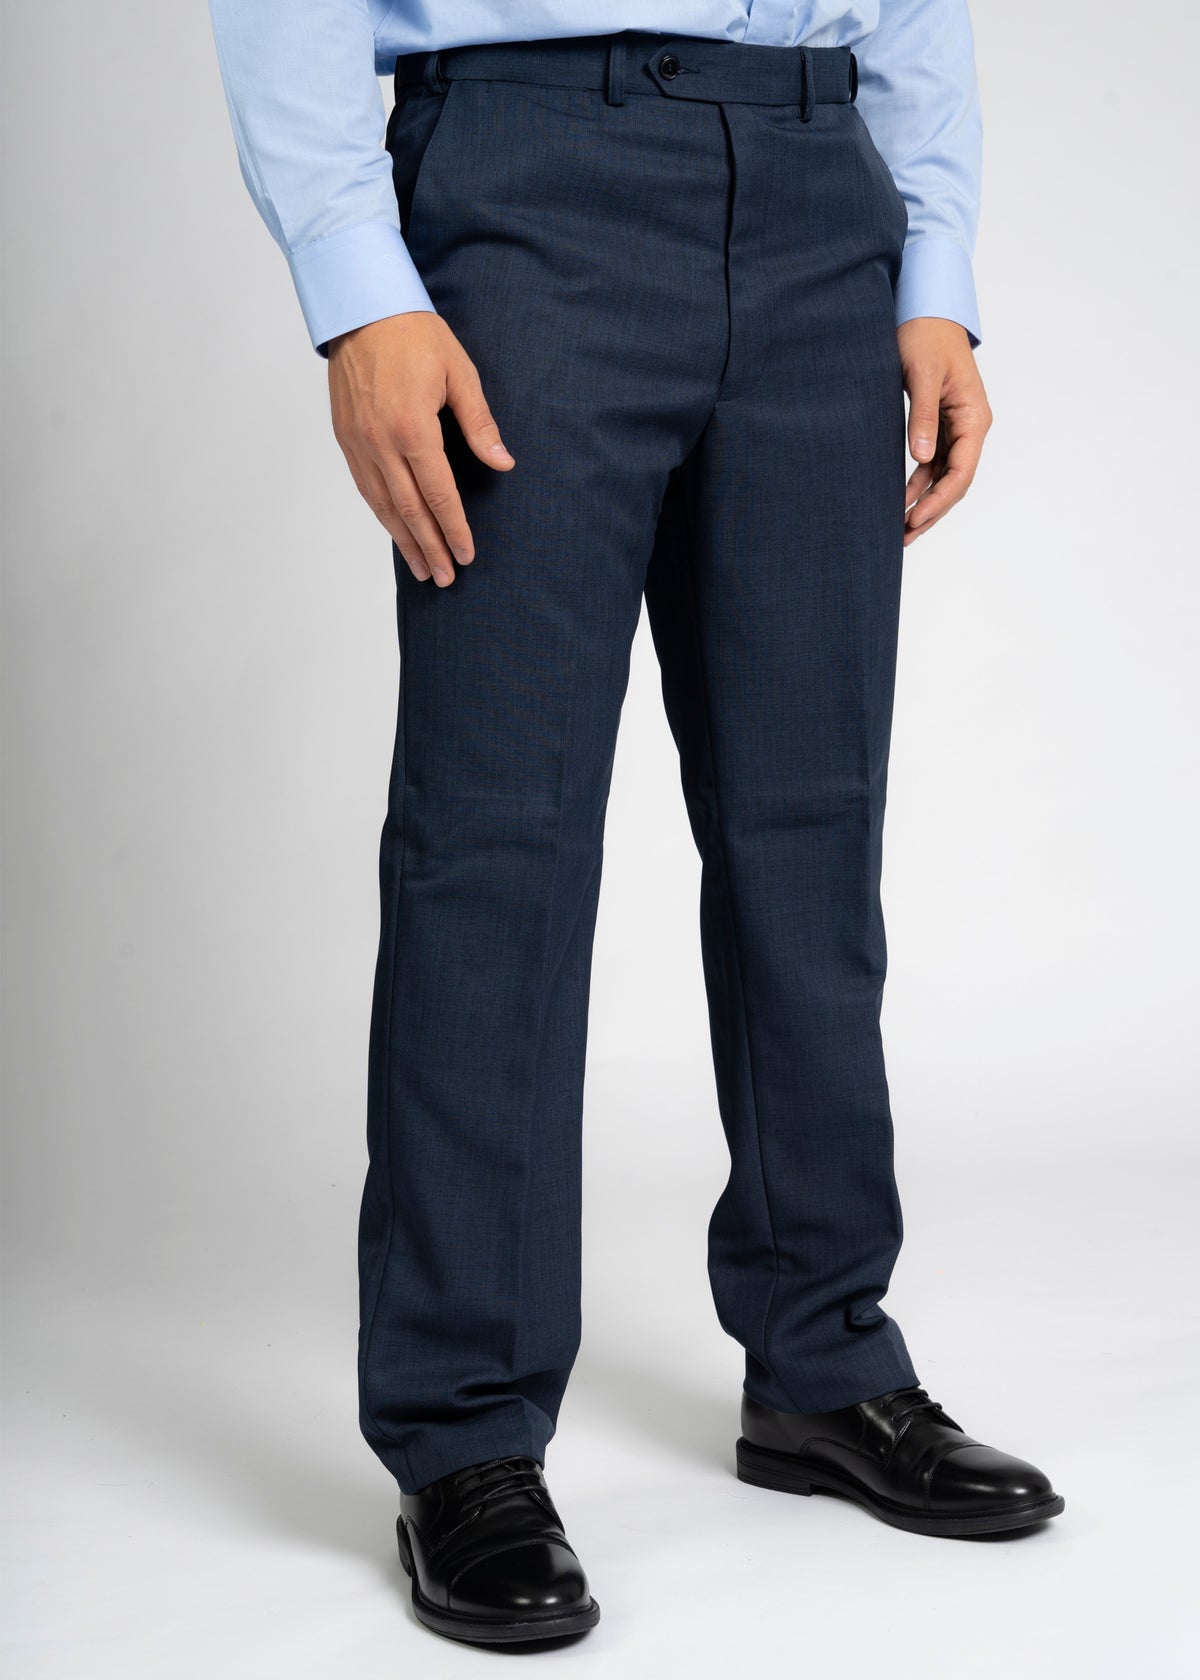 Blake smart trousers  mid grey  Alzheimers Society